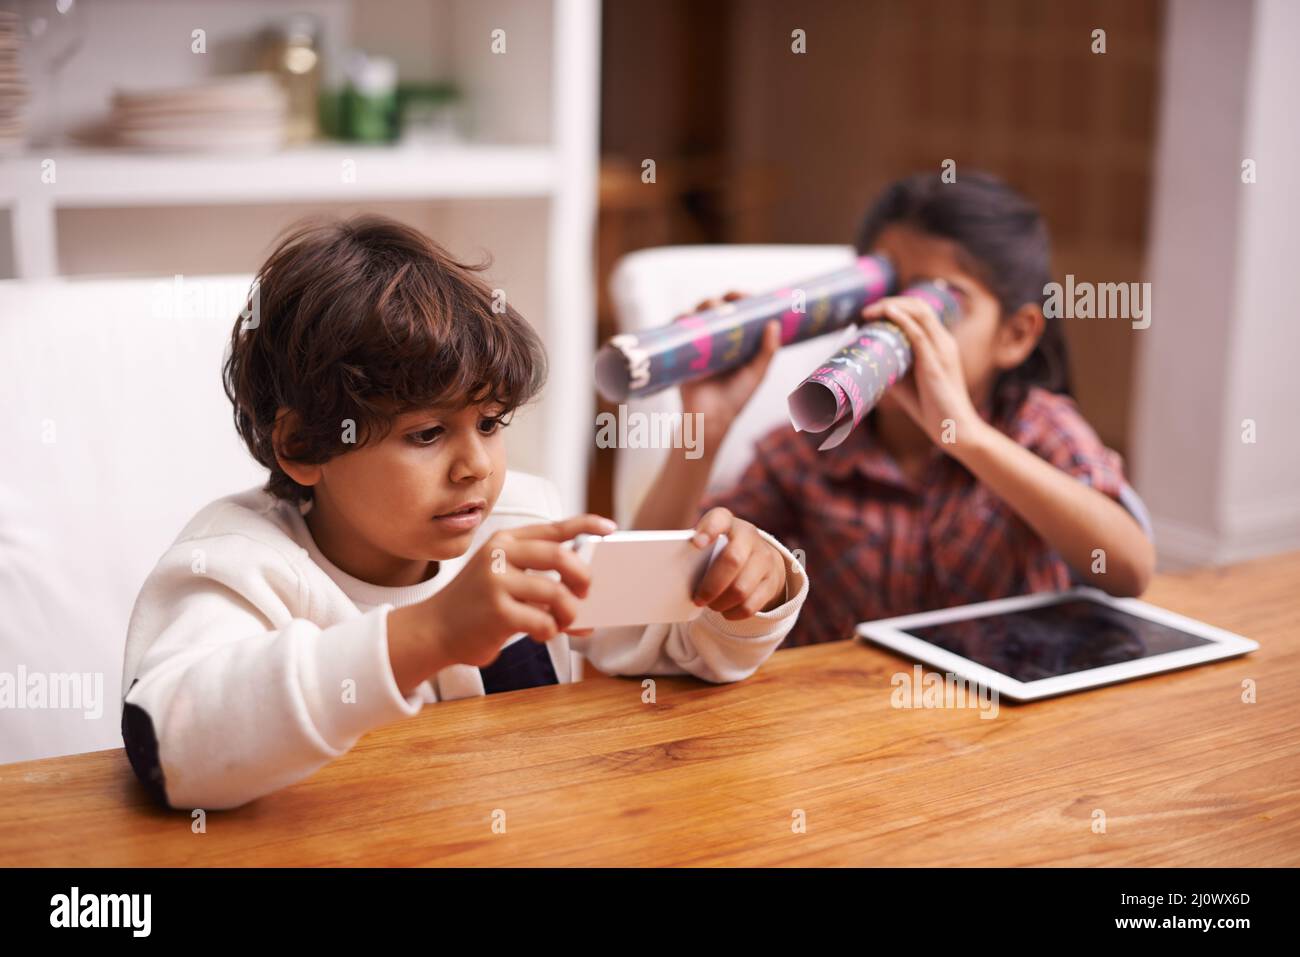 Hes going for a highscore... shes trying to distract him. Shot of two siblings having fun at home. Stock Photo